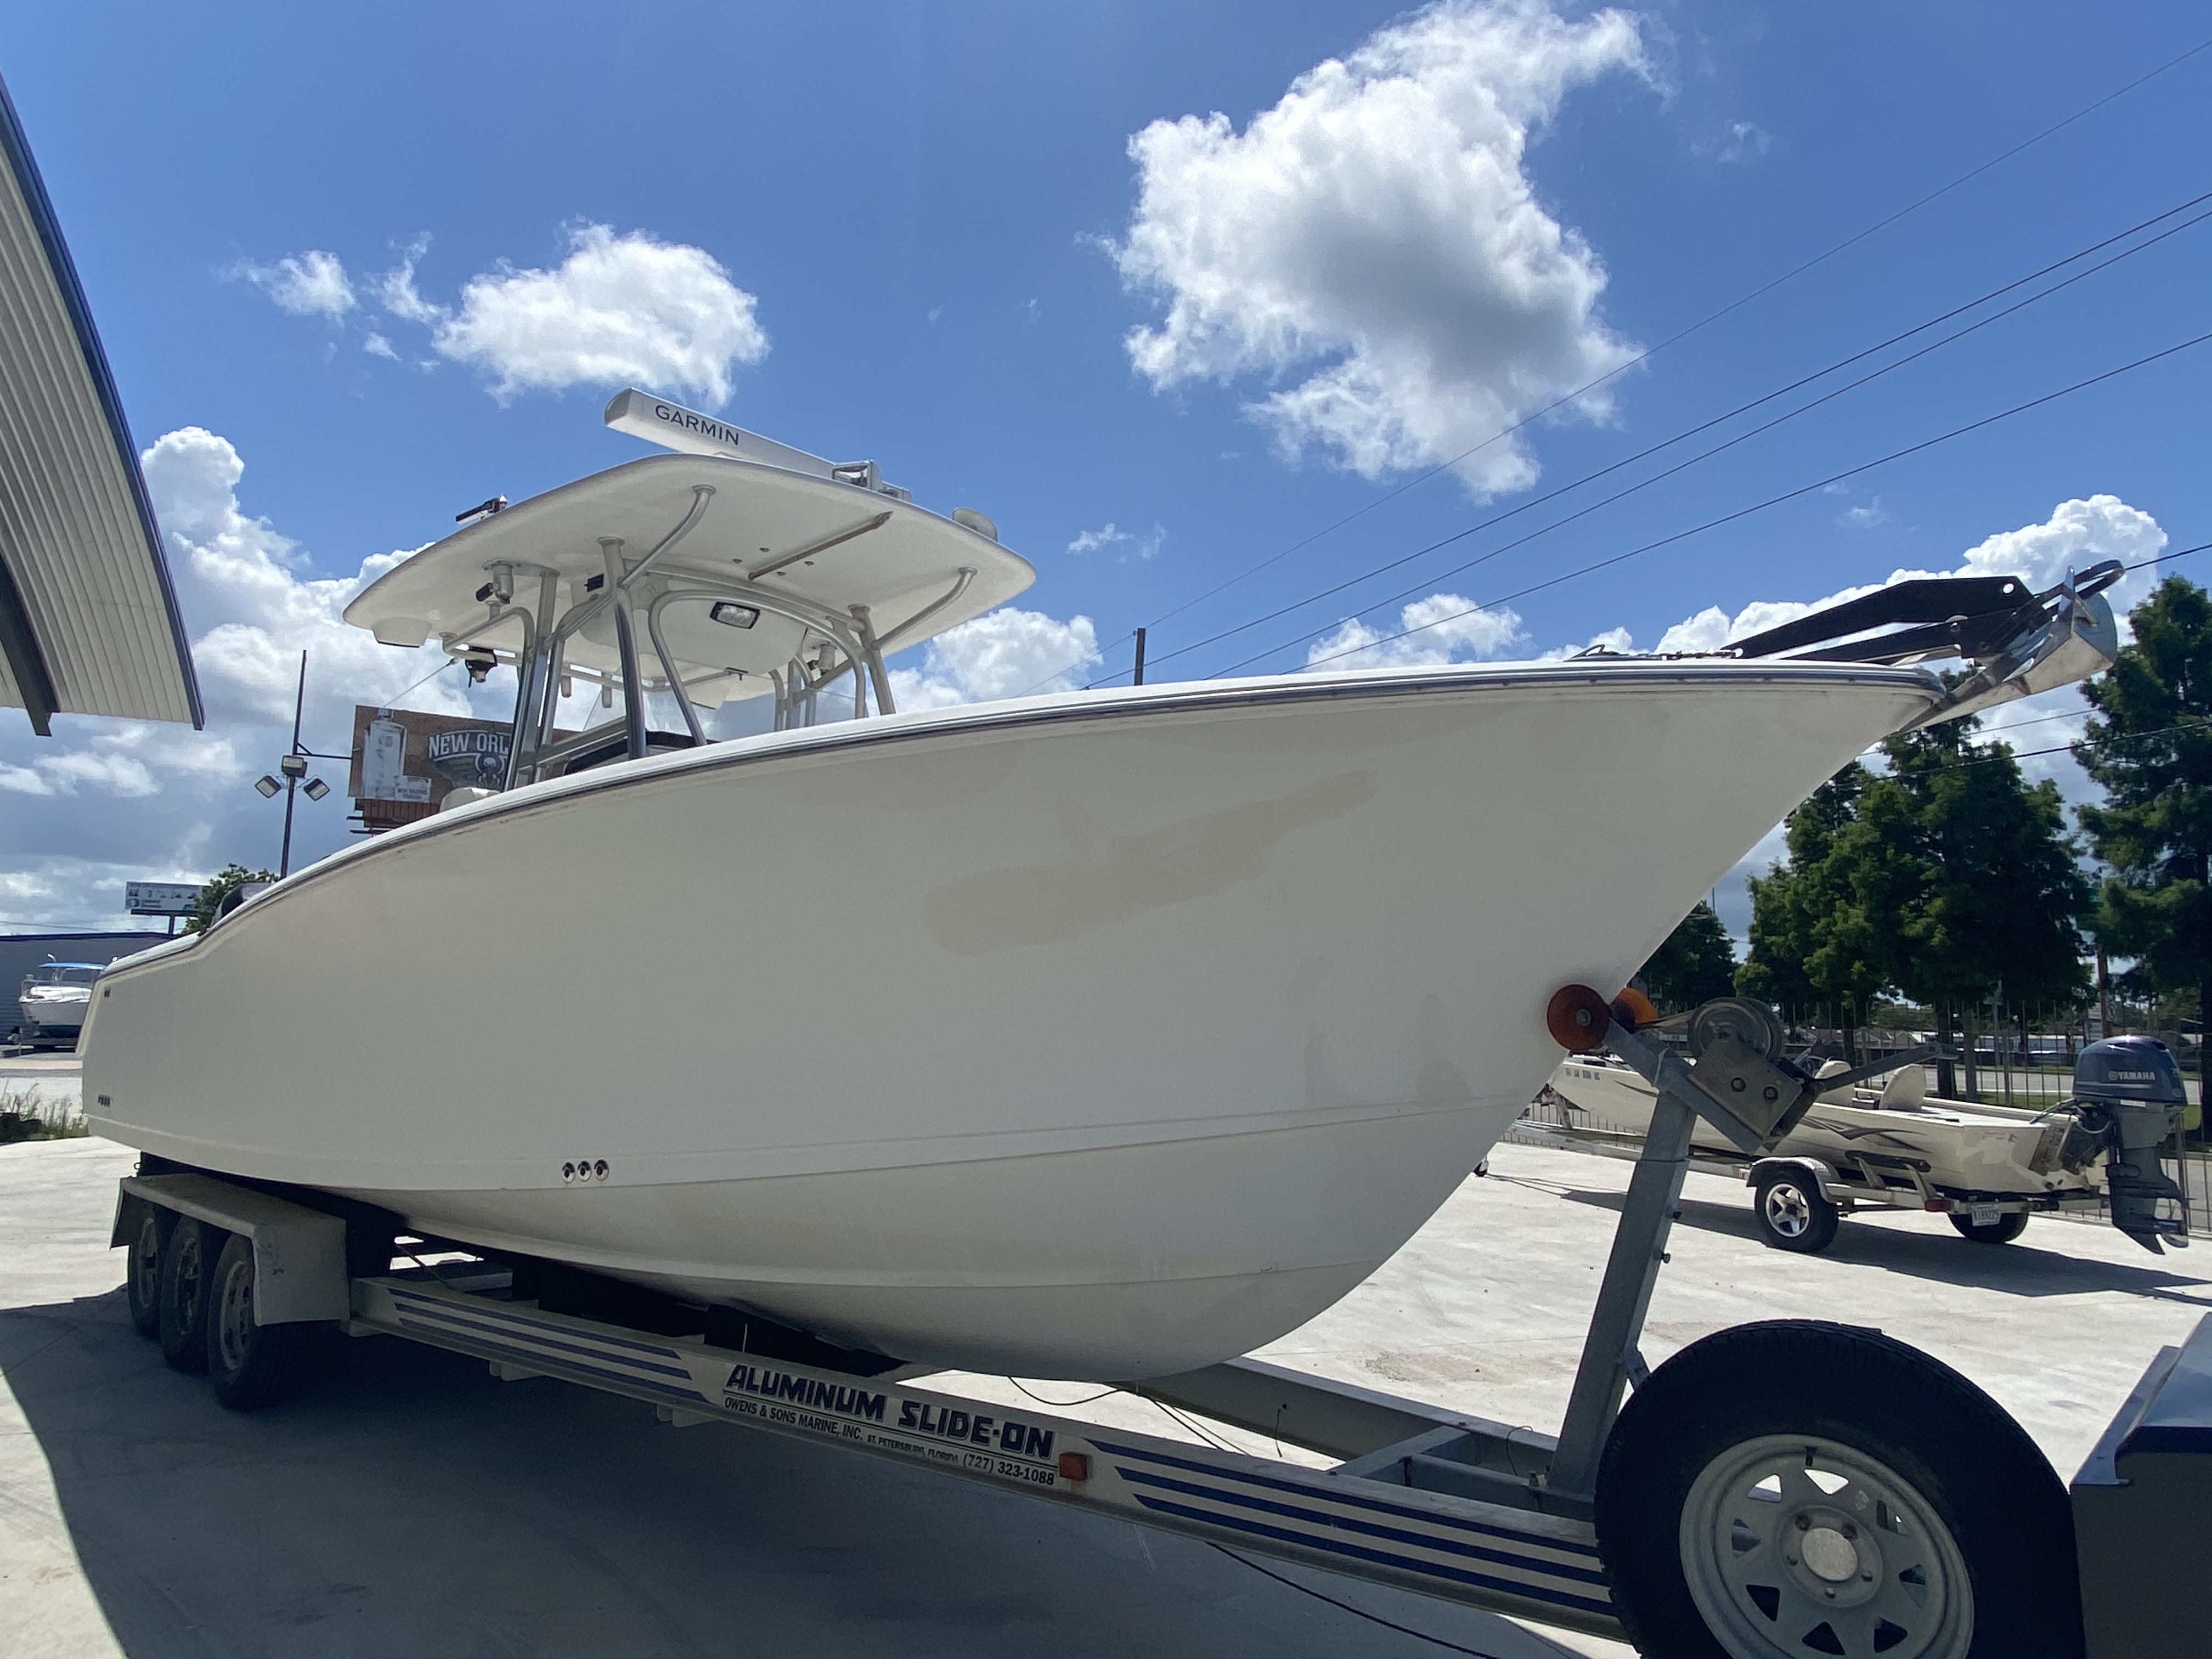 2008 Sea Hunt boat for sale, model of the boat is 29 Gamefish & Image # 24 of 31